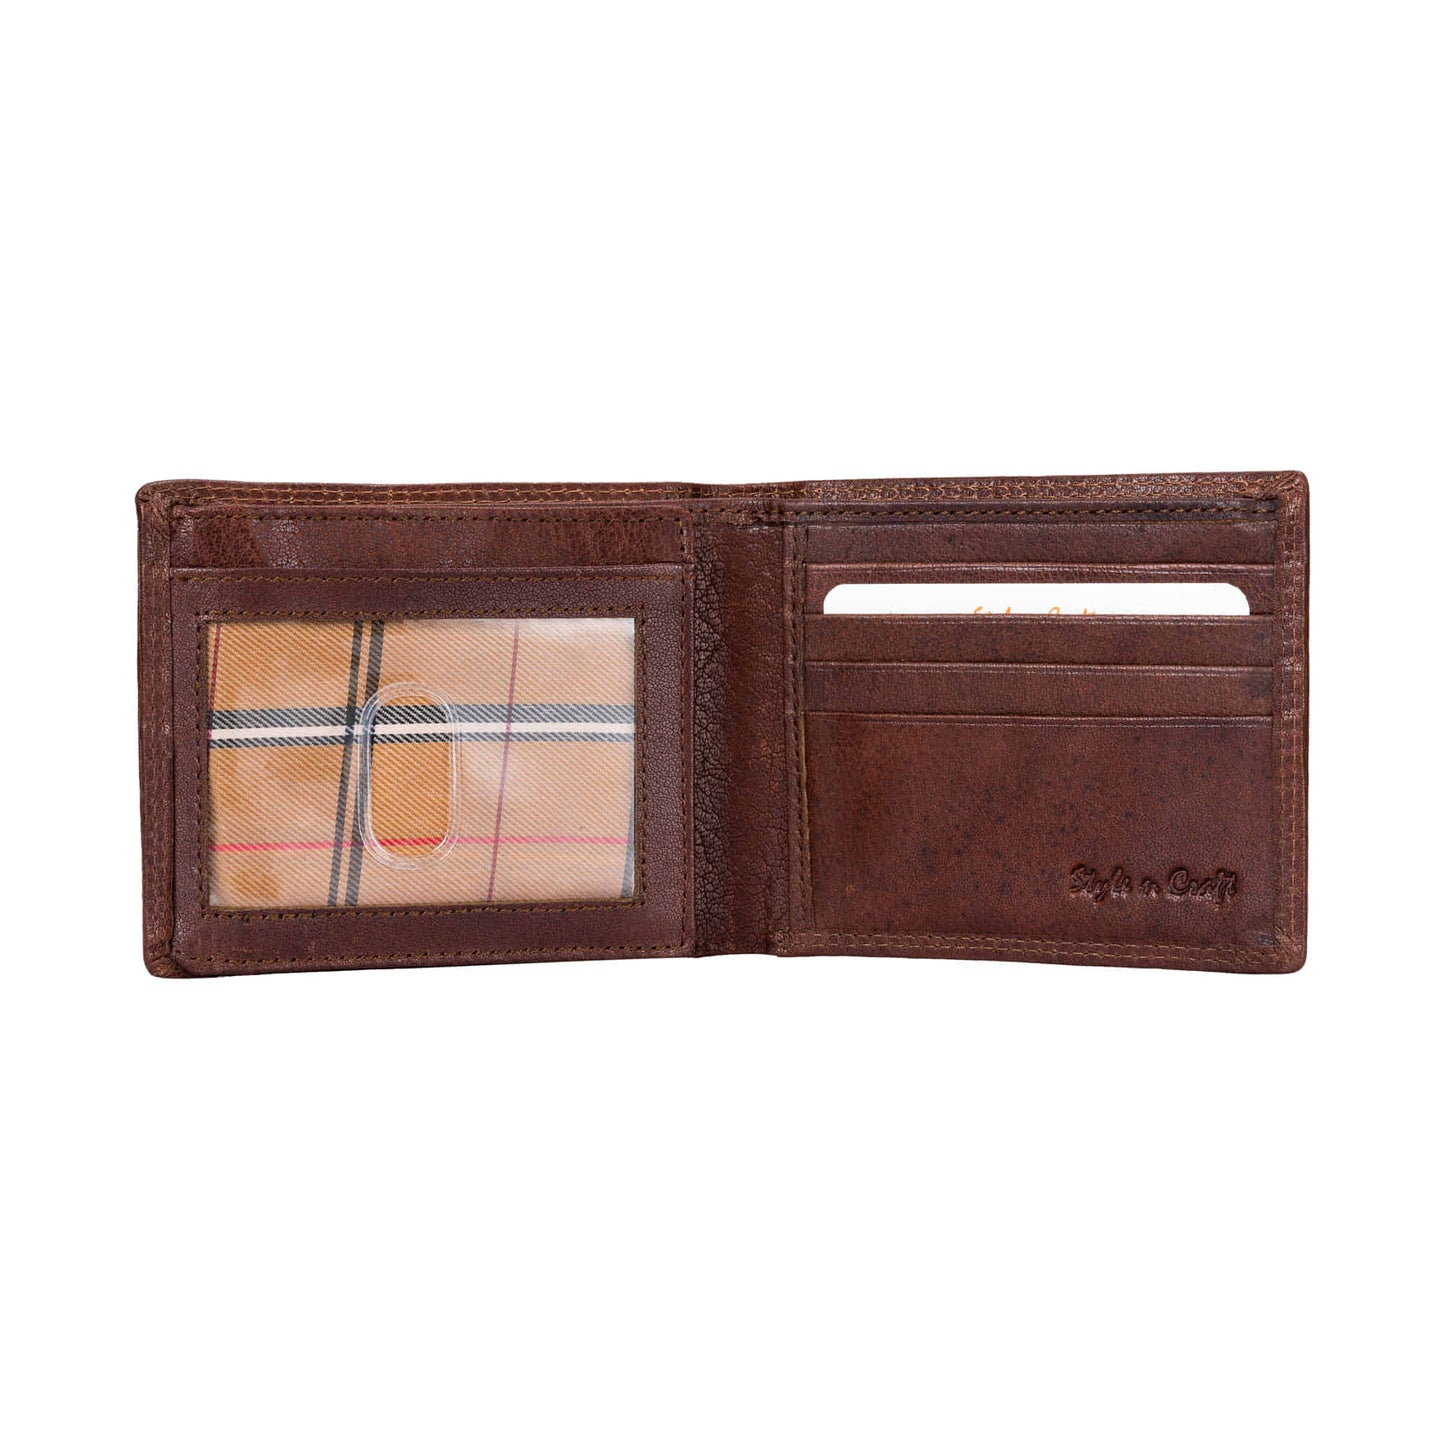 Style n Craft 301766 bifold wallet with side flap in dark brown color vintage leather with 2 tone effect - open view